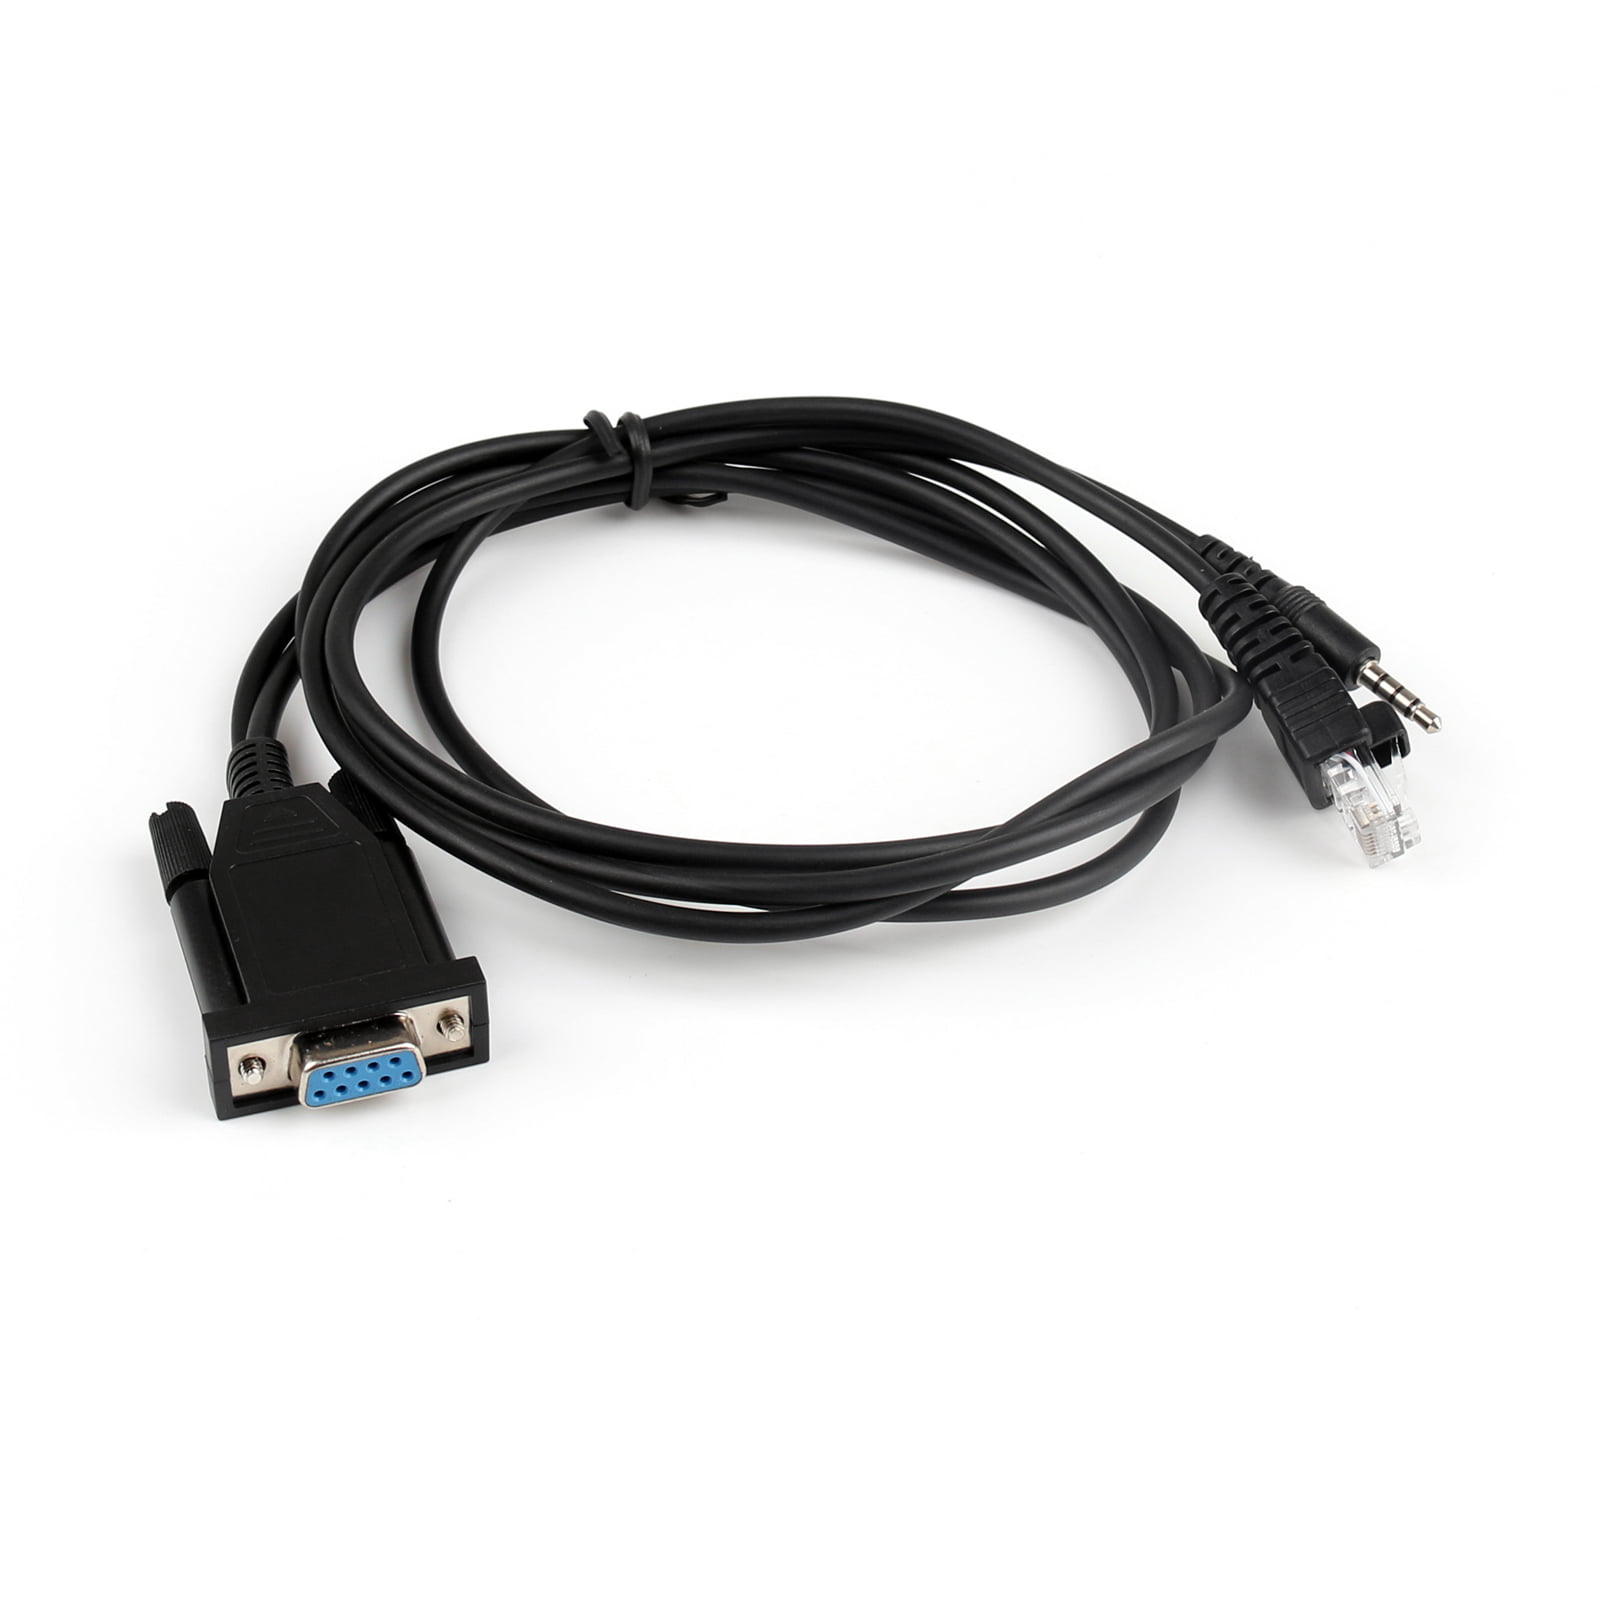 Mad Hornets 2 In 1 Programming Cable For Yaesu Vertex Vx 00 Vx 2100 Vx 20 Vx 300 Vx 400 Walmart Com Walmart Com